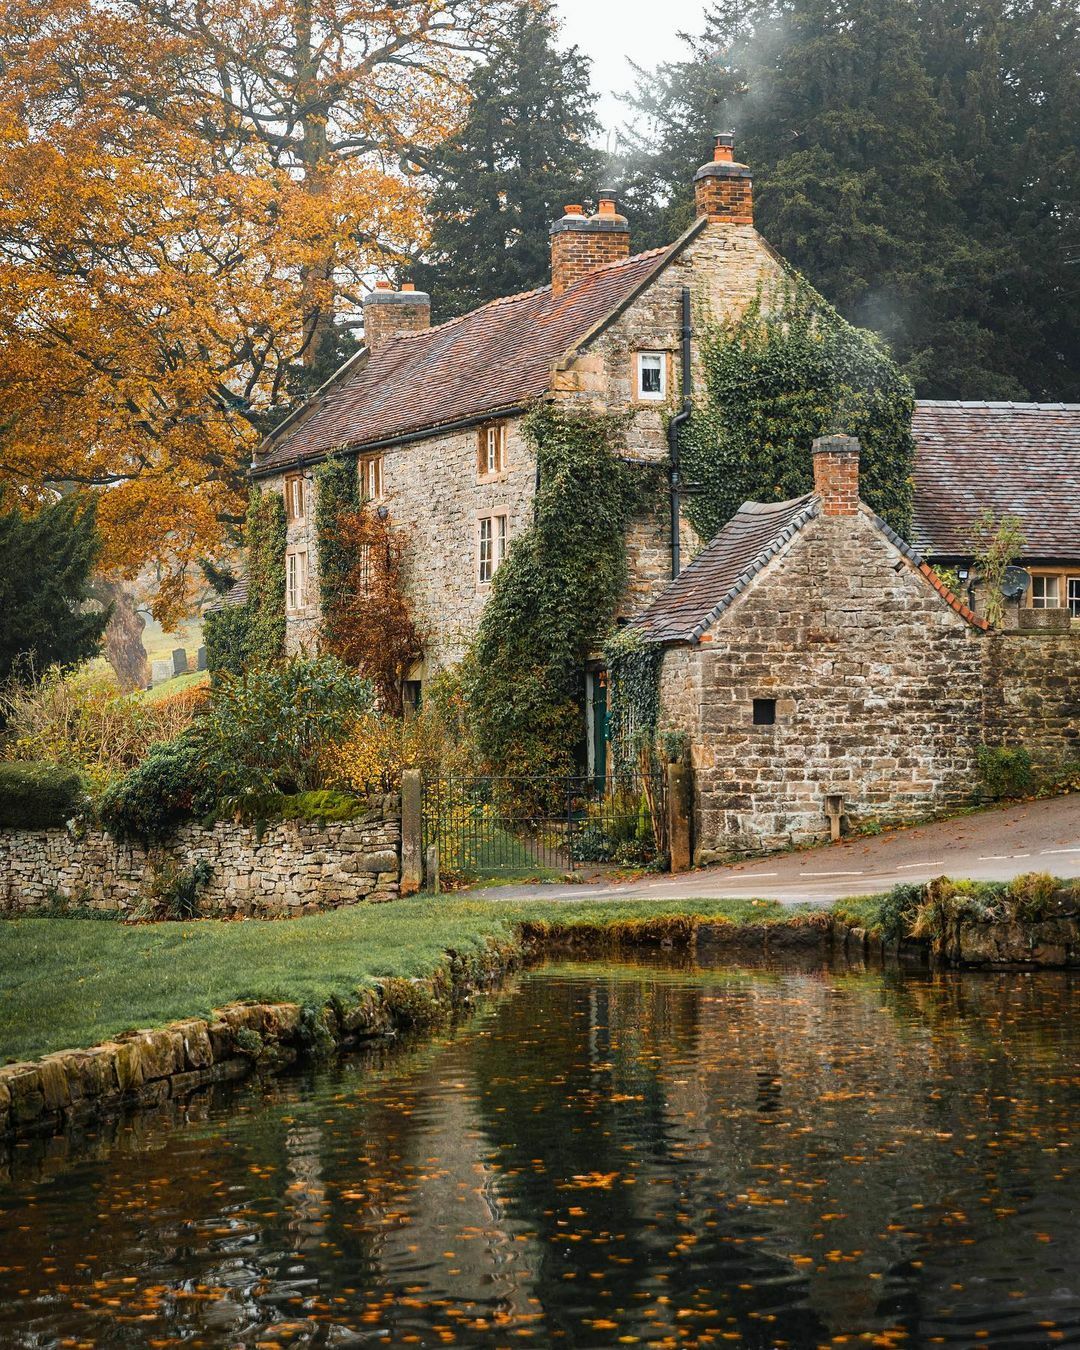 Stone House In The Small Village Of Tissington, Derbyshire, England